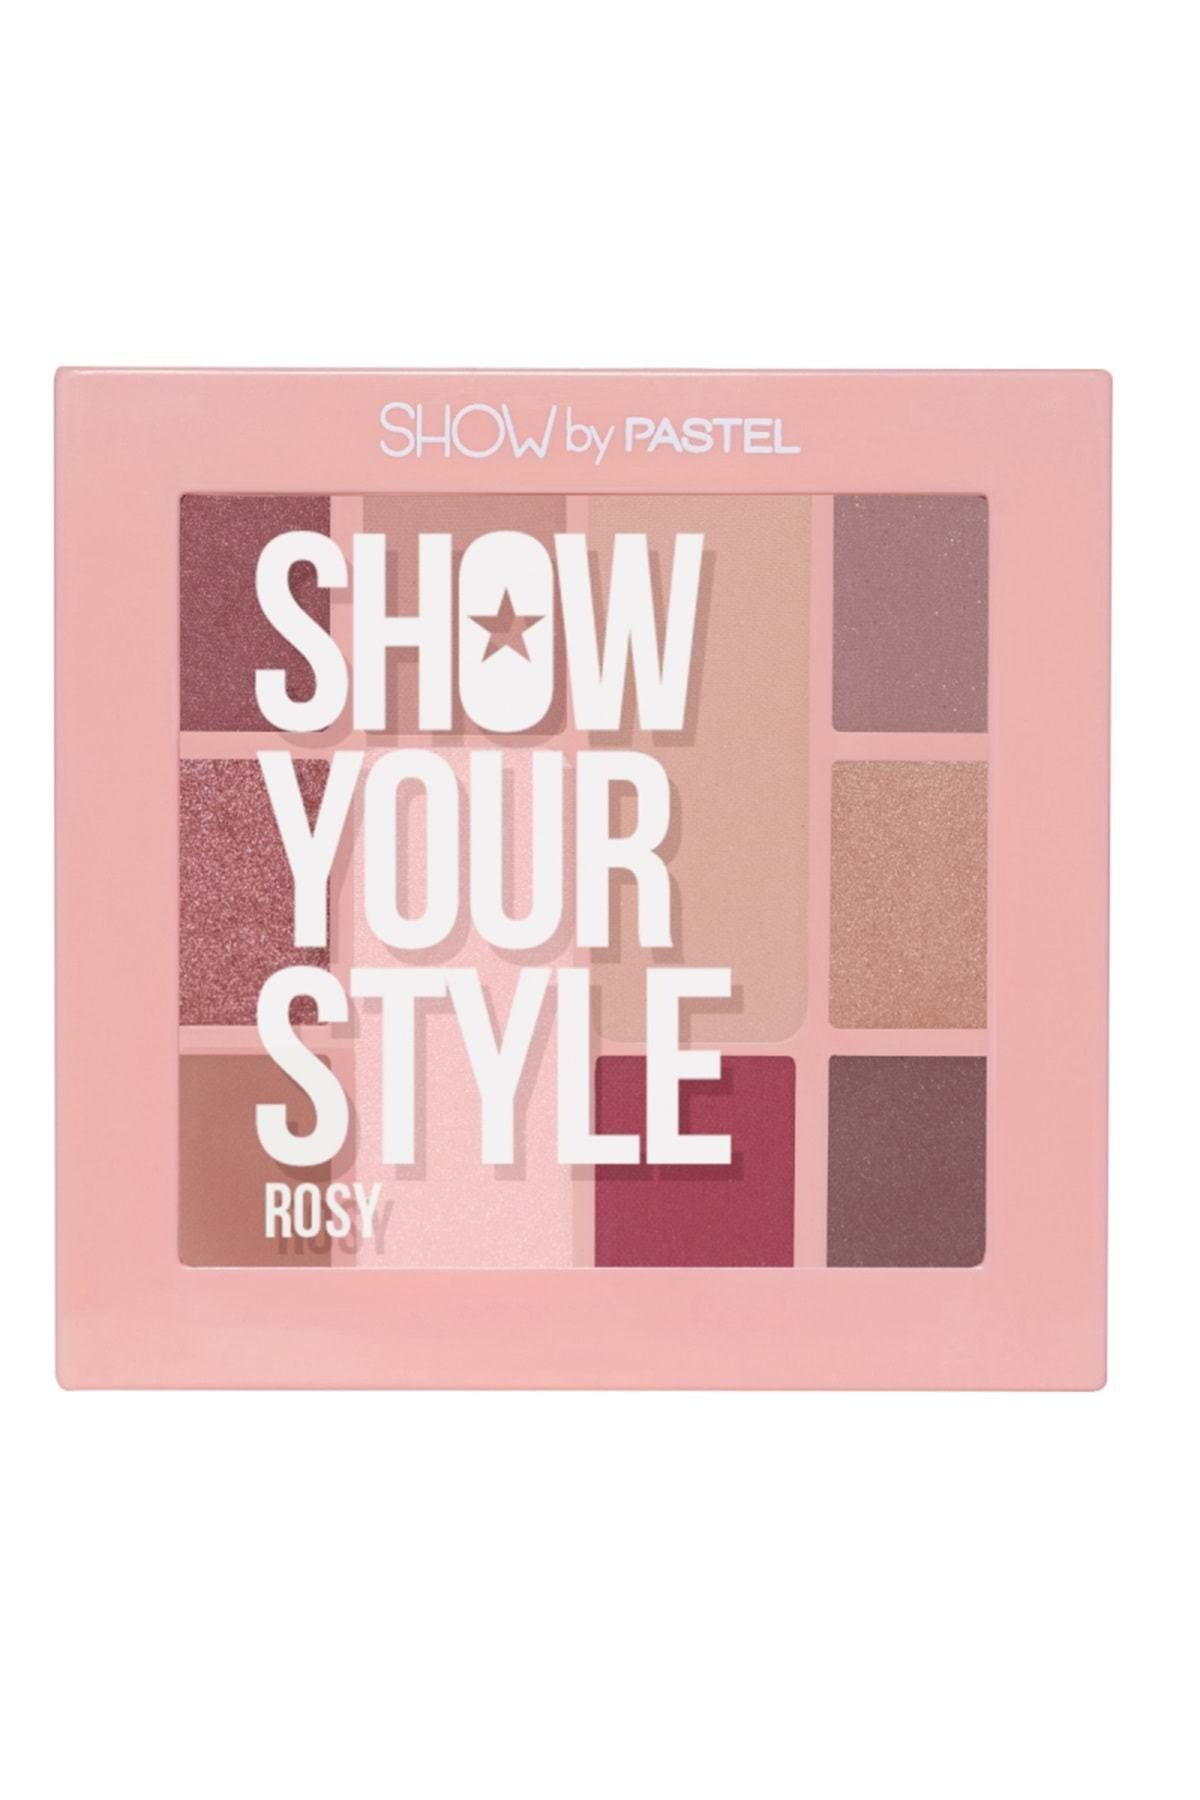 Pastel Show By Pastel Show Your Style - Far Paleti 465 Rosy8 x 1.30 g / 2 x 3.30 g